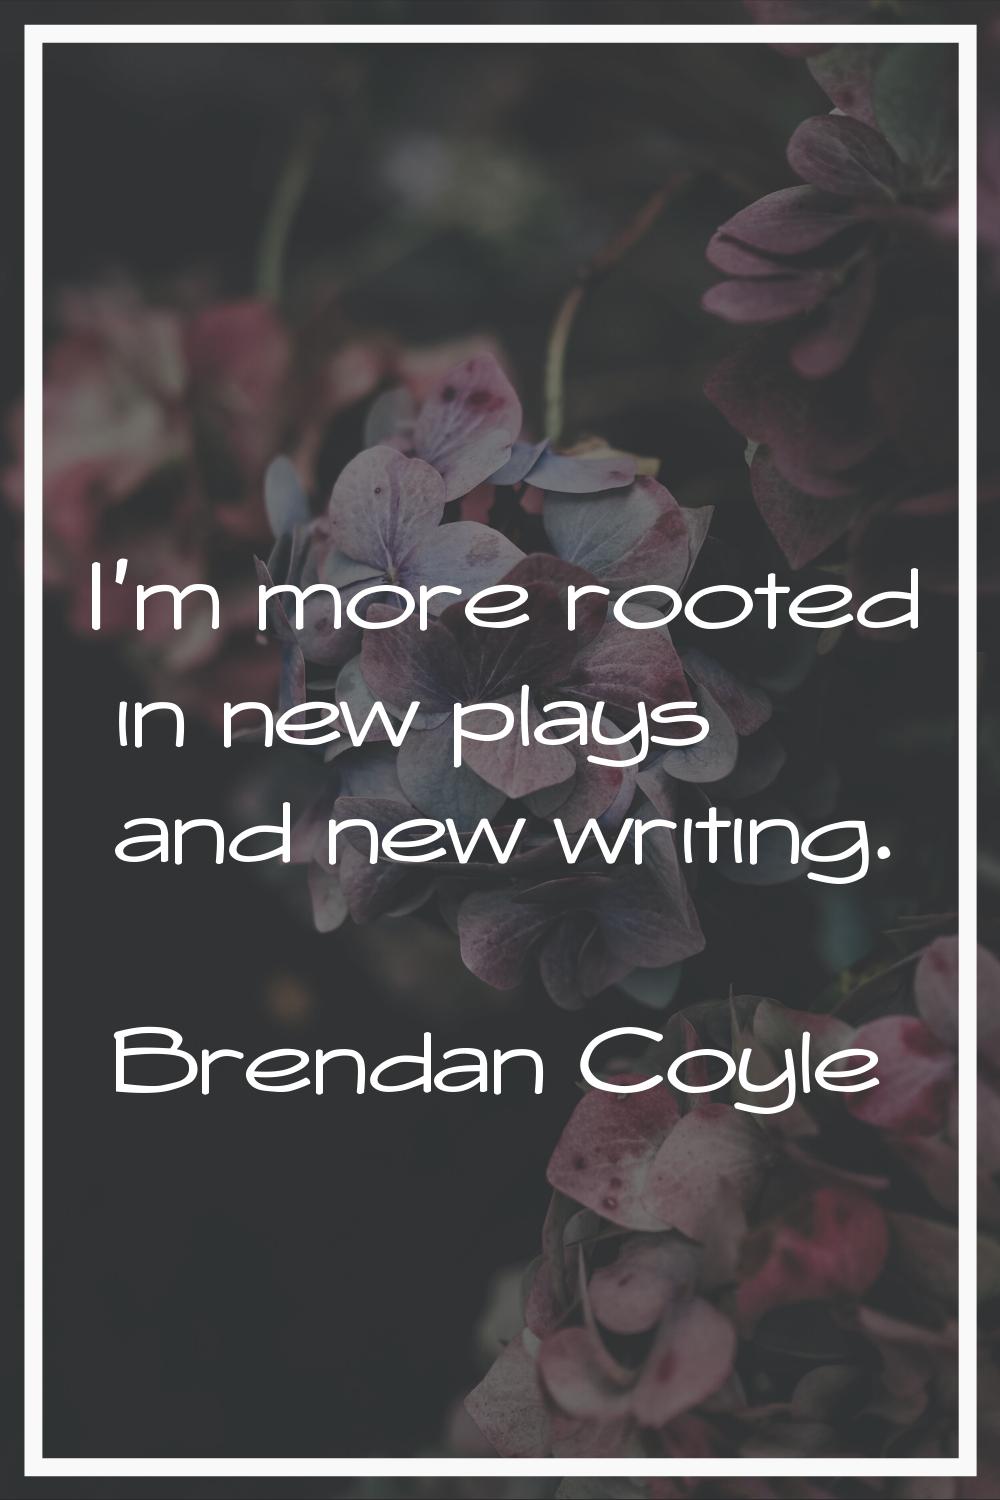 I'm more rooted in new plays and new writing.